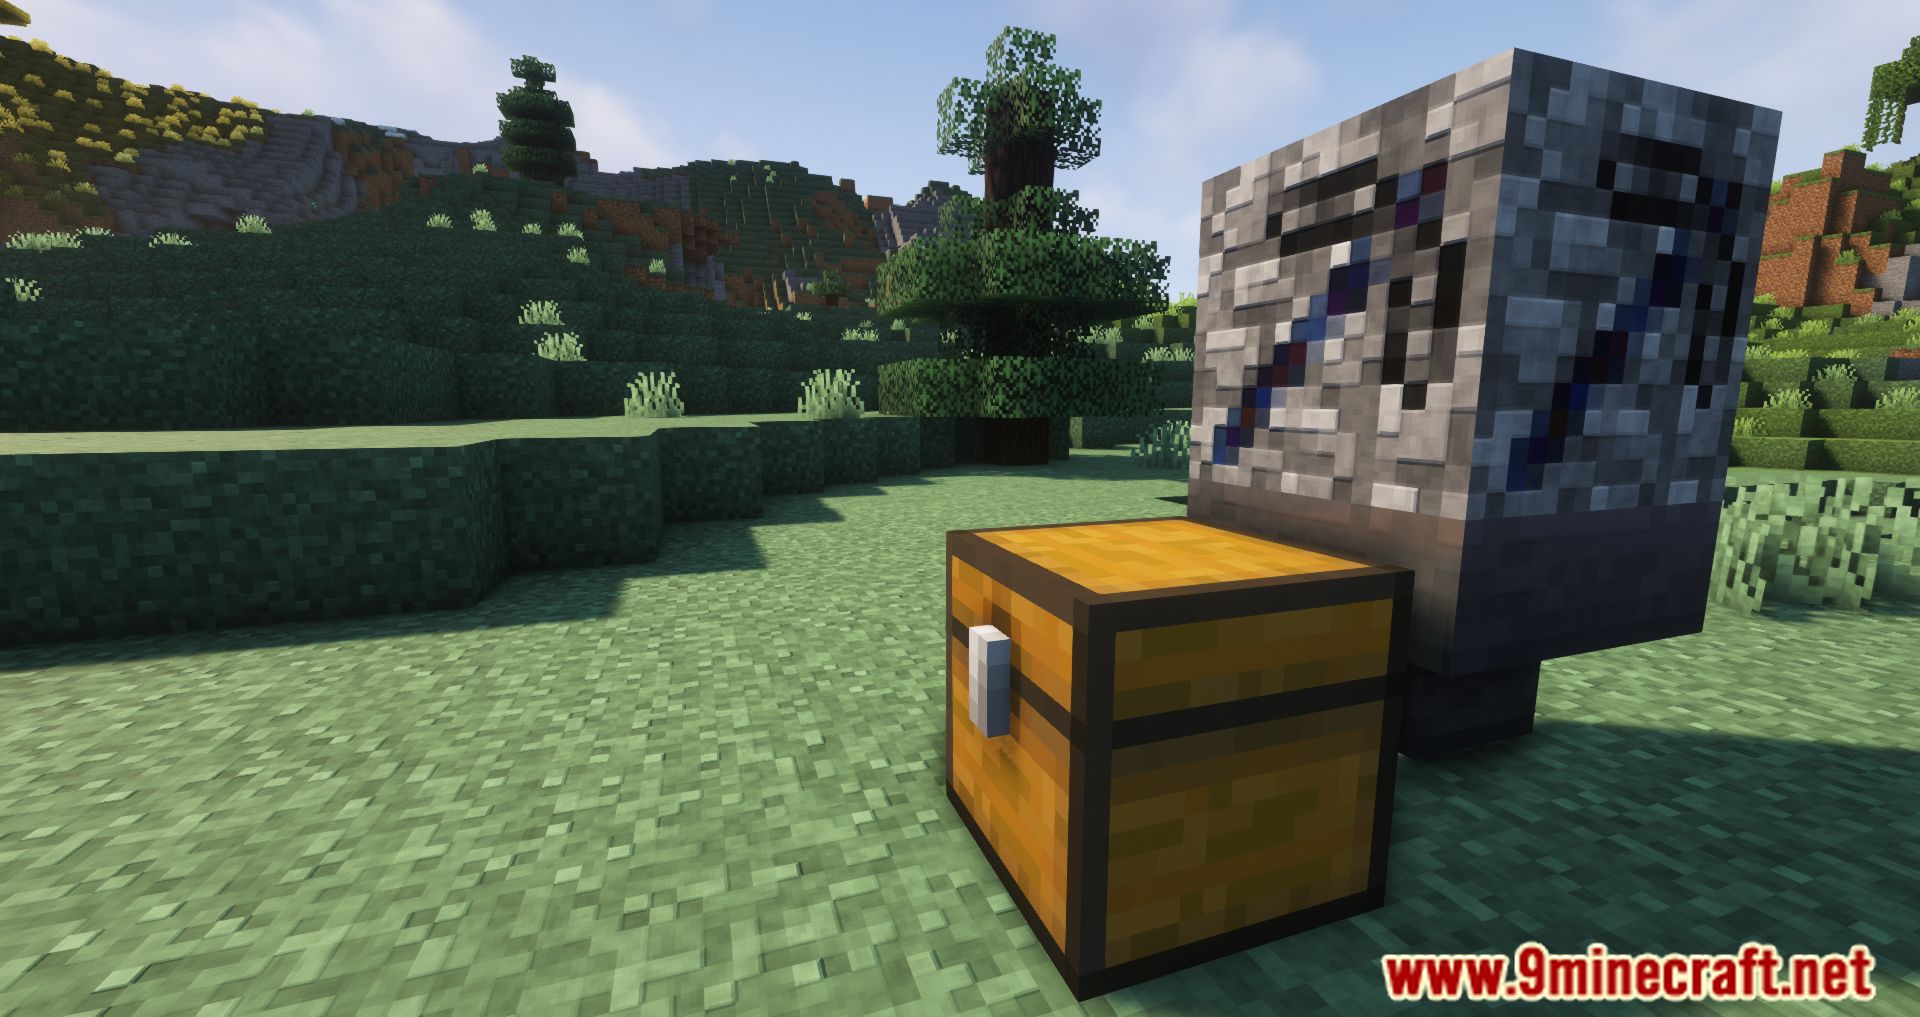 Simple Cobblestone Generator Mod (1.20.4, 1.19.4) - A New Feature Added To The Game 9